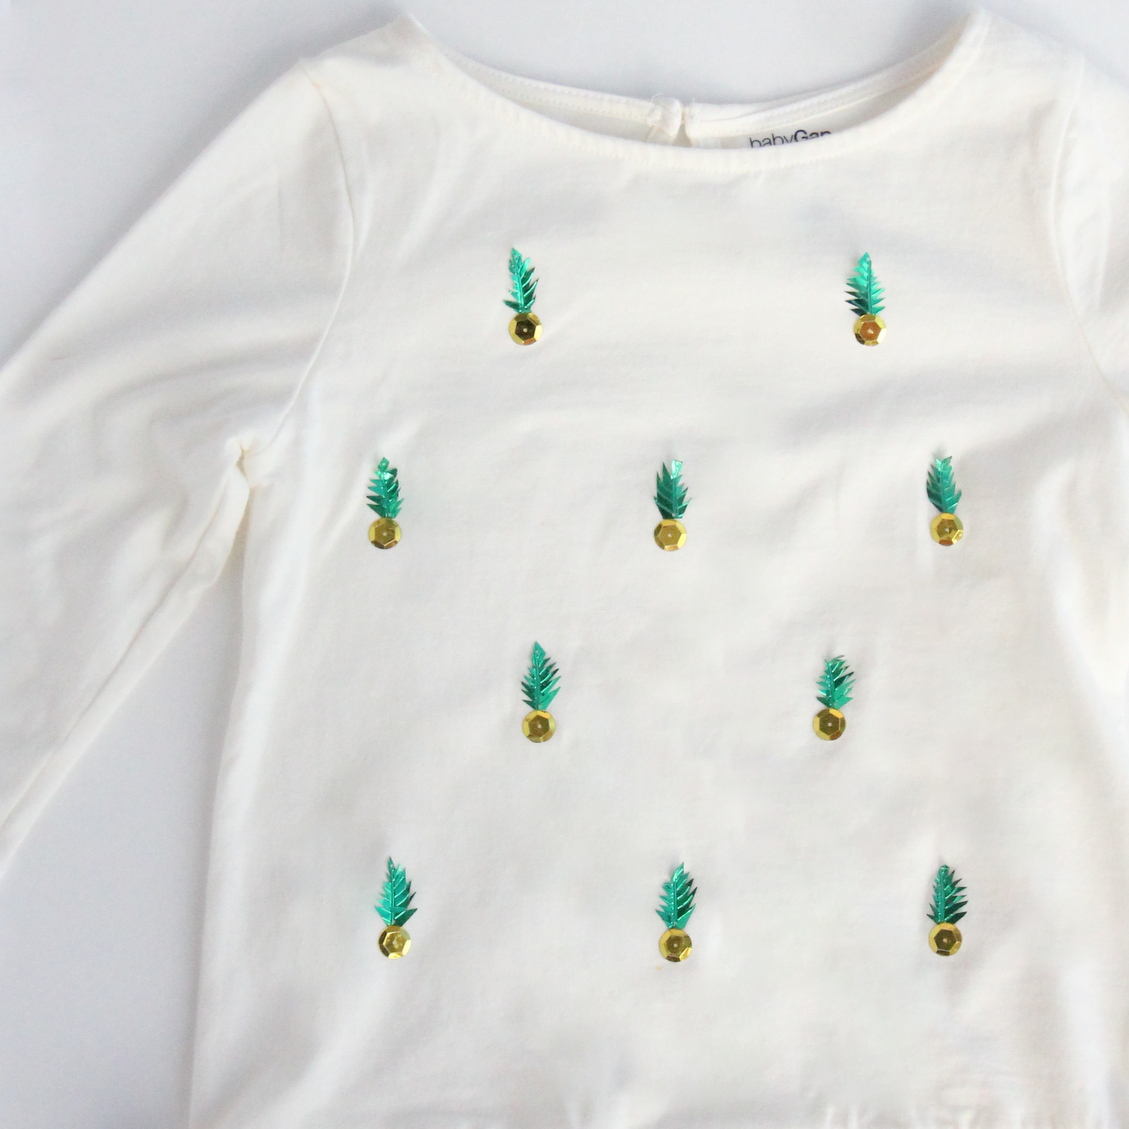 easy pineapple shirt how to